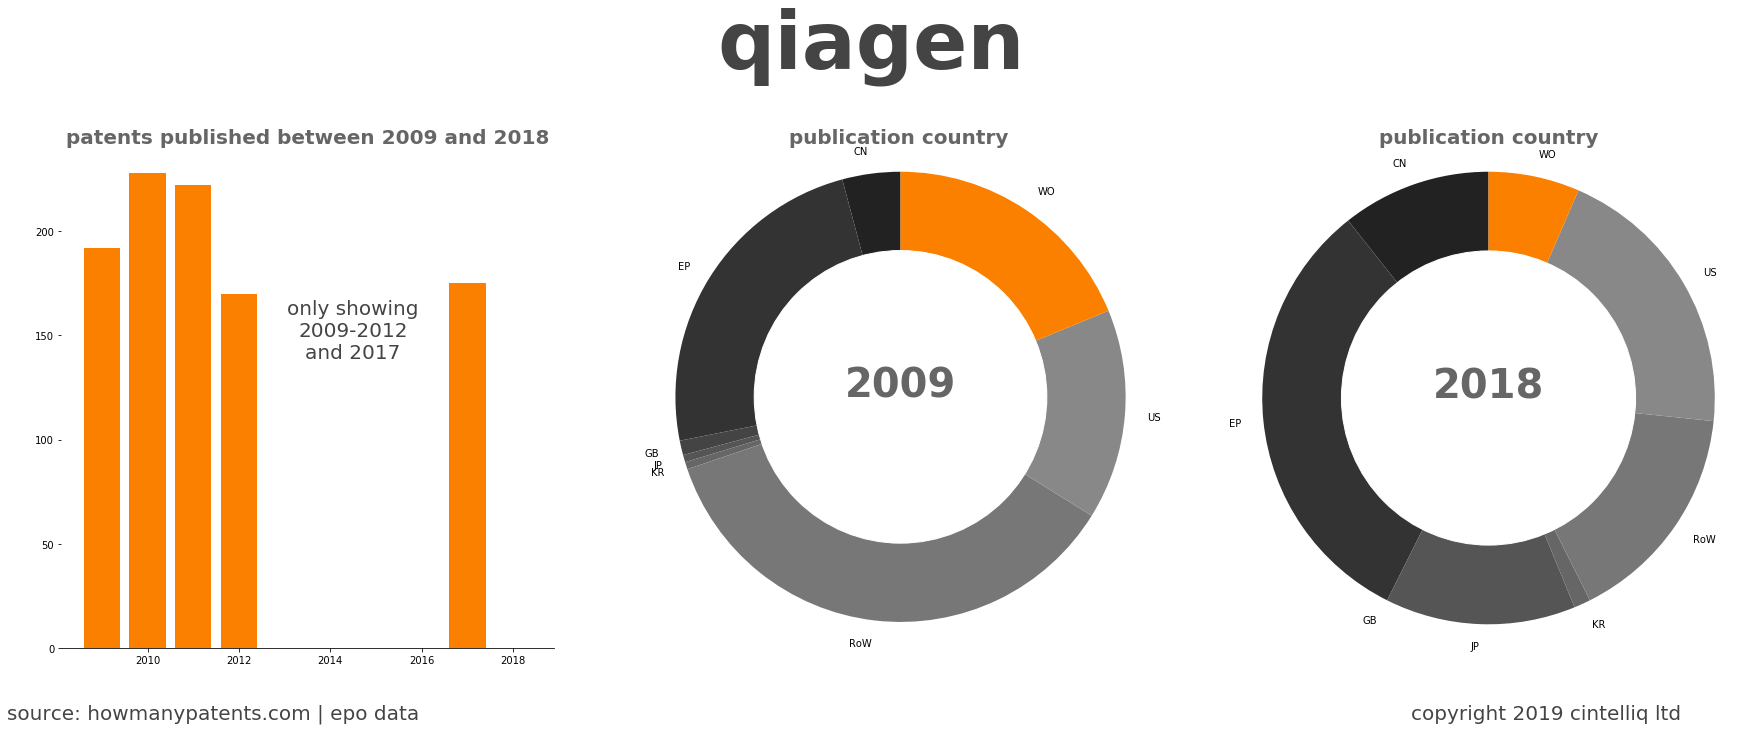 summary of patents for Qiagen